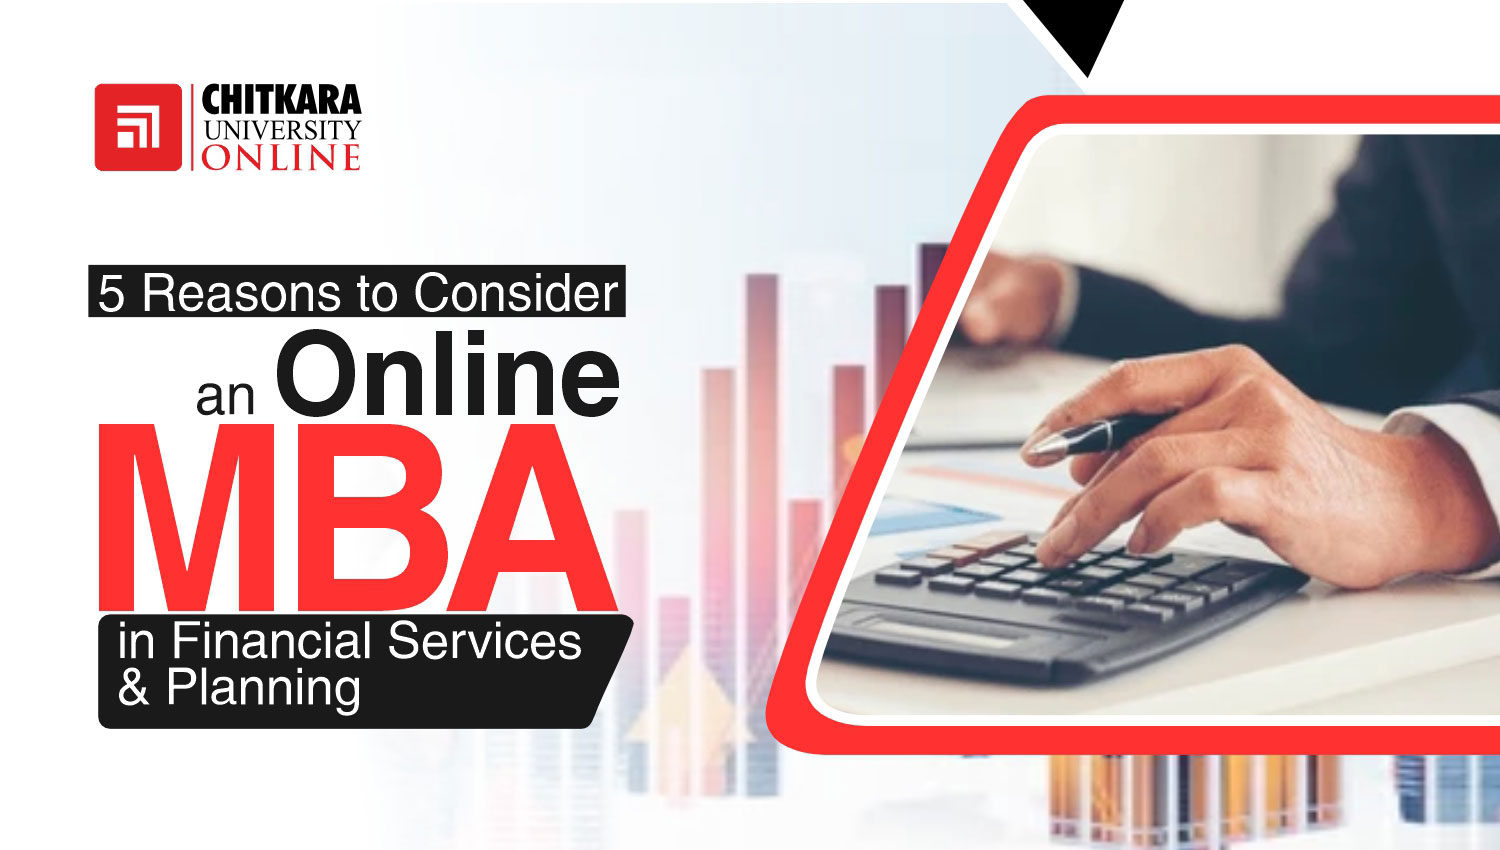 Online MBA in Financial Services & Planning | ChitkaraU Online